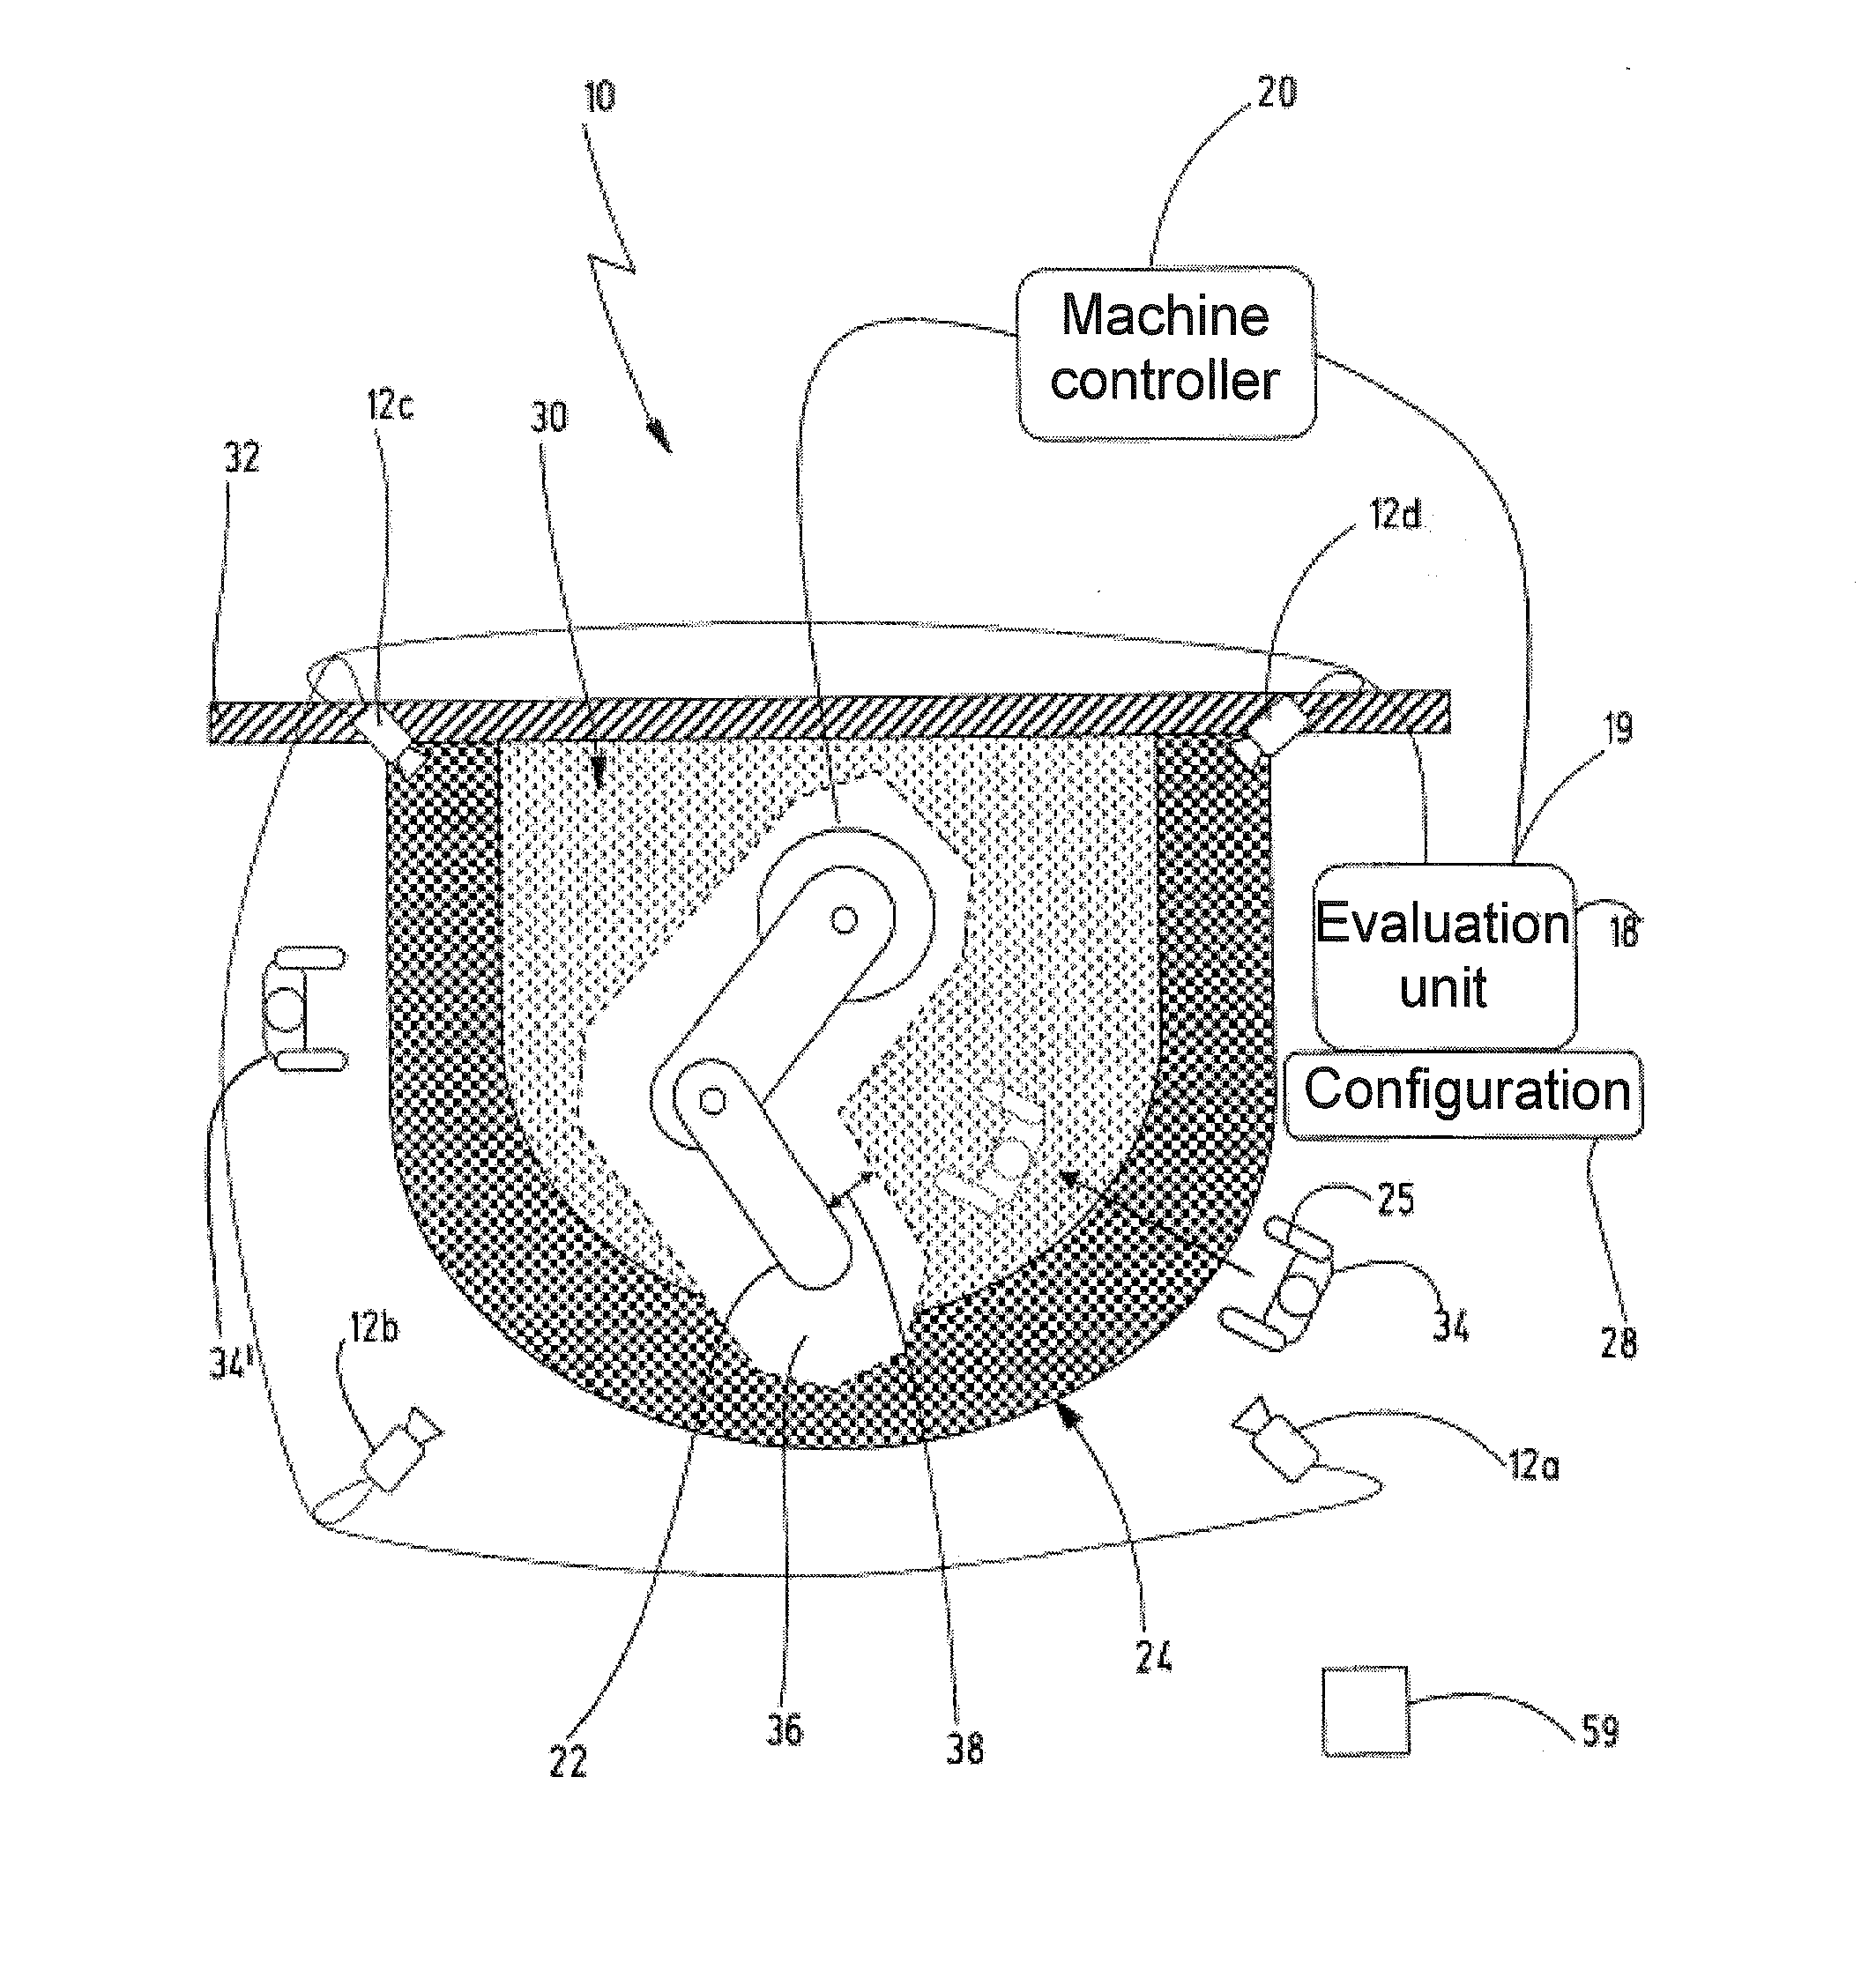 Method and device for safeguarding a hazardous working area of an automated machine